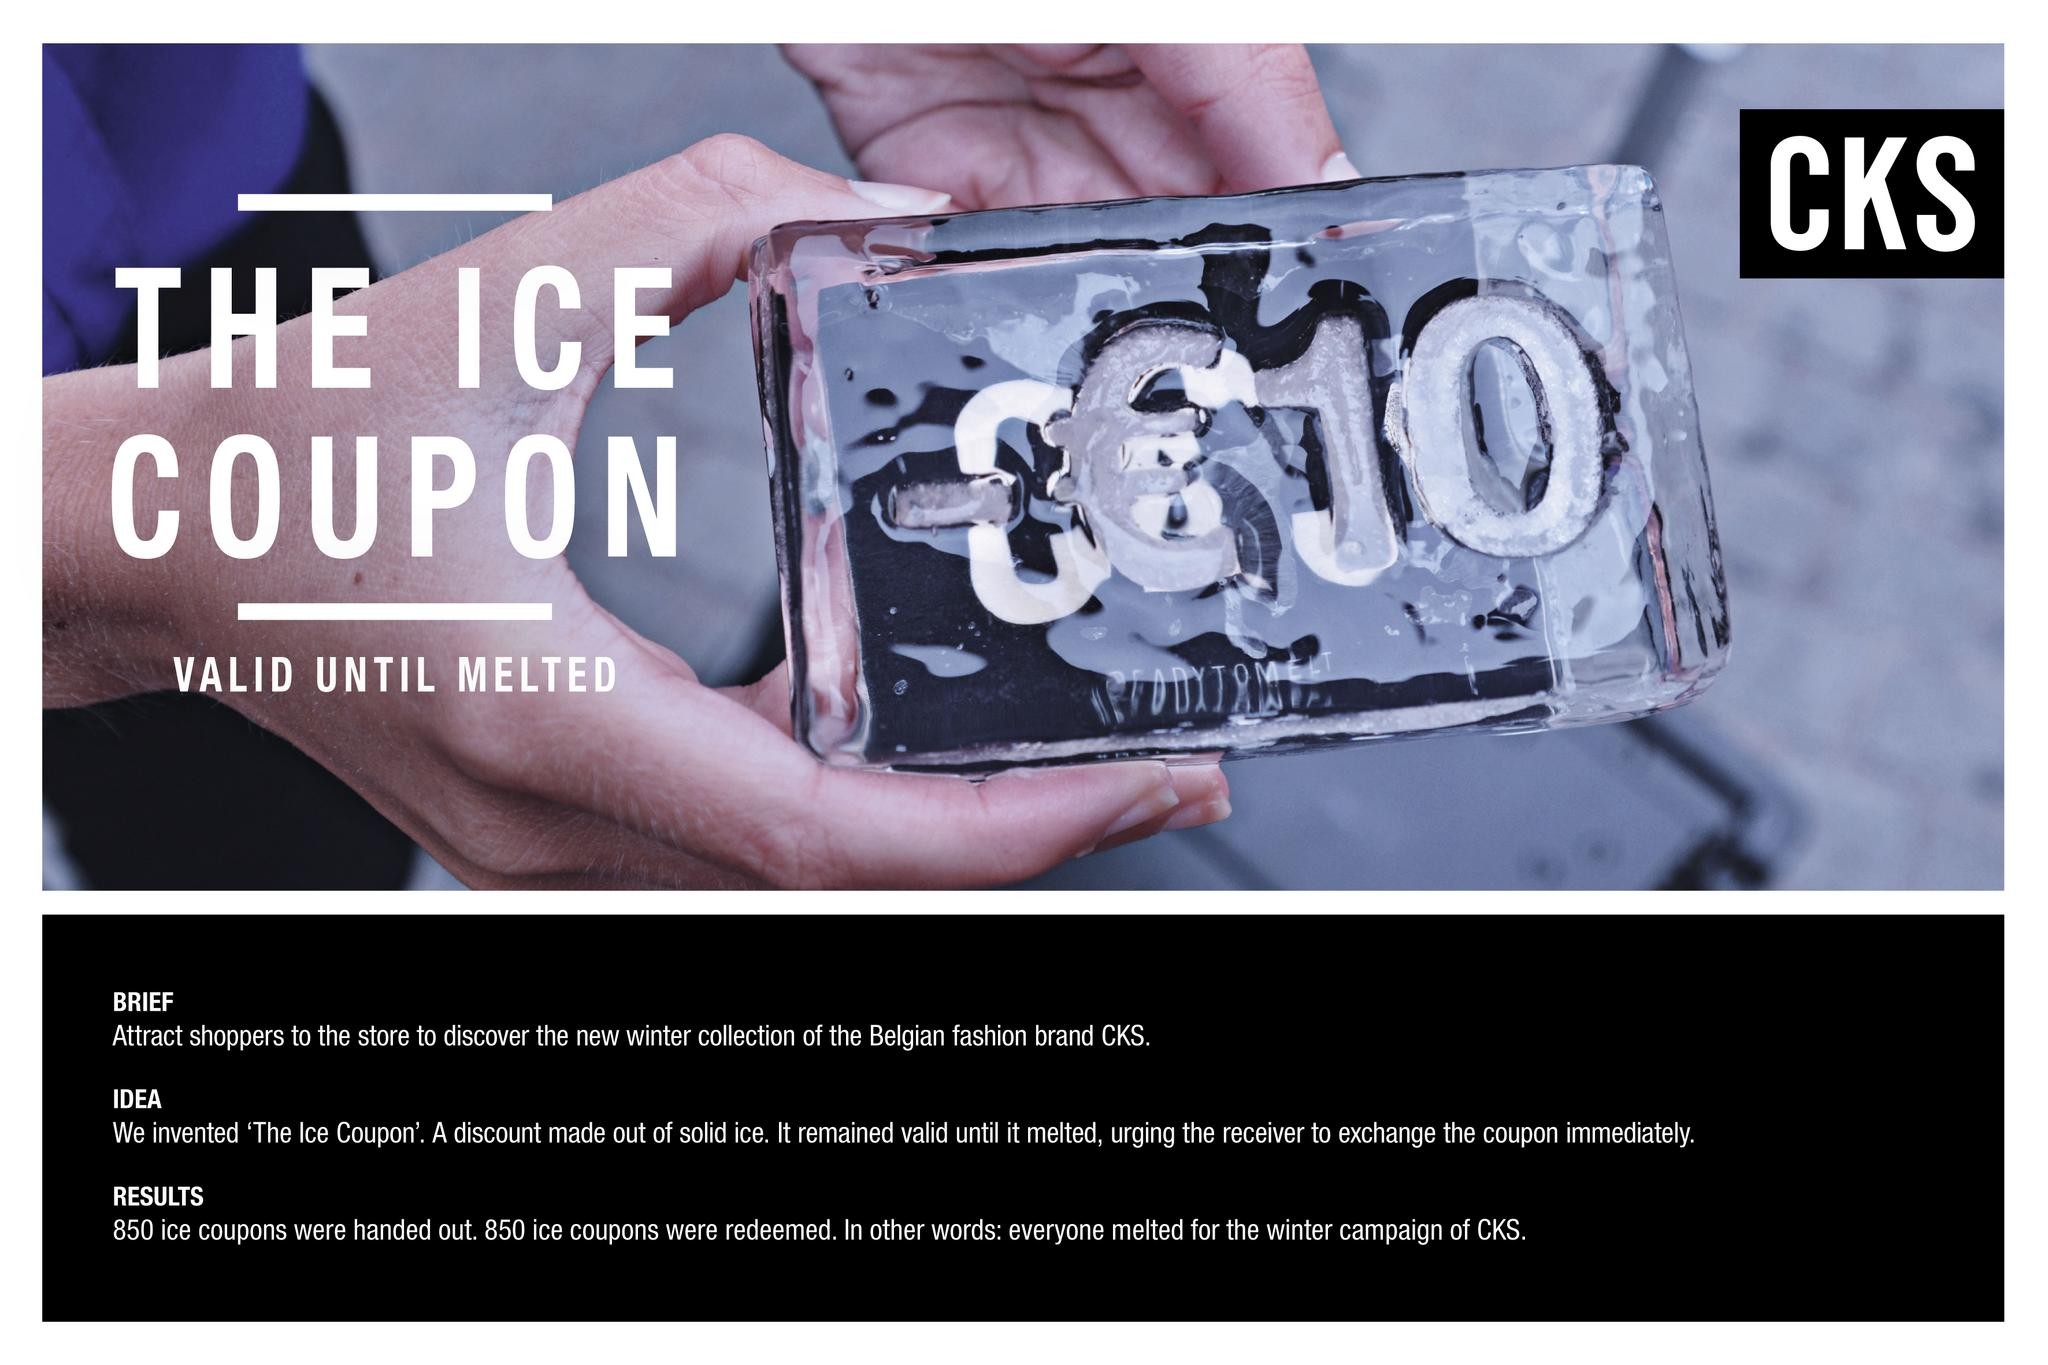 THE ICE COUPON